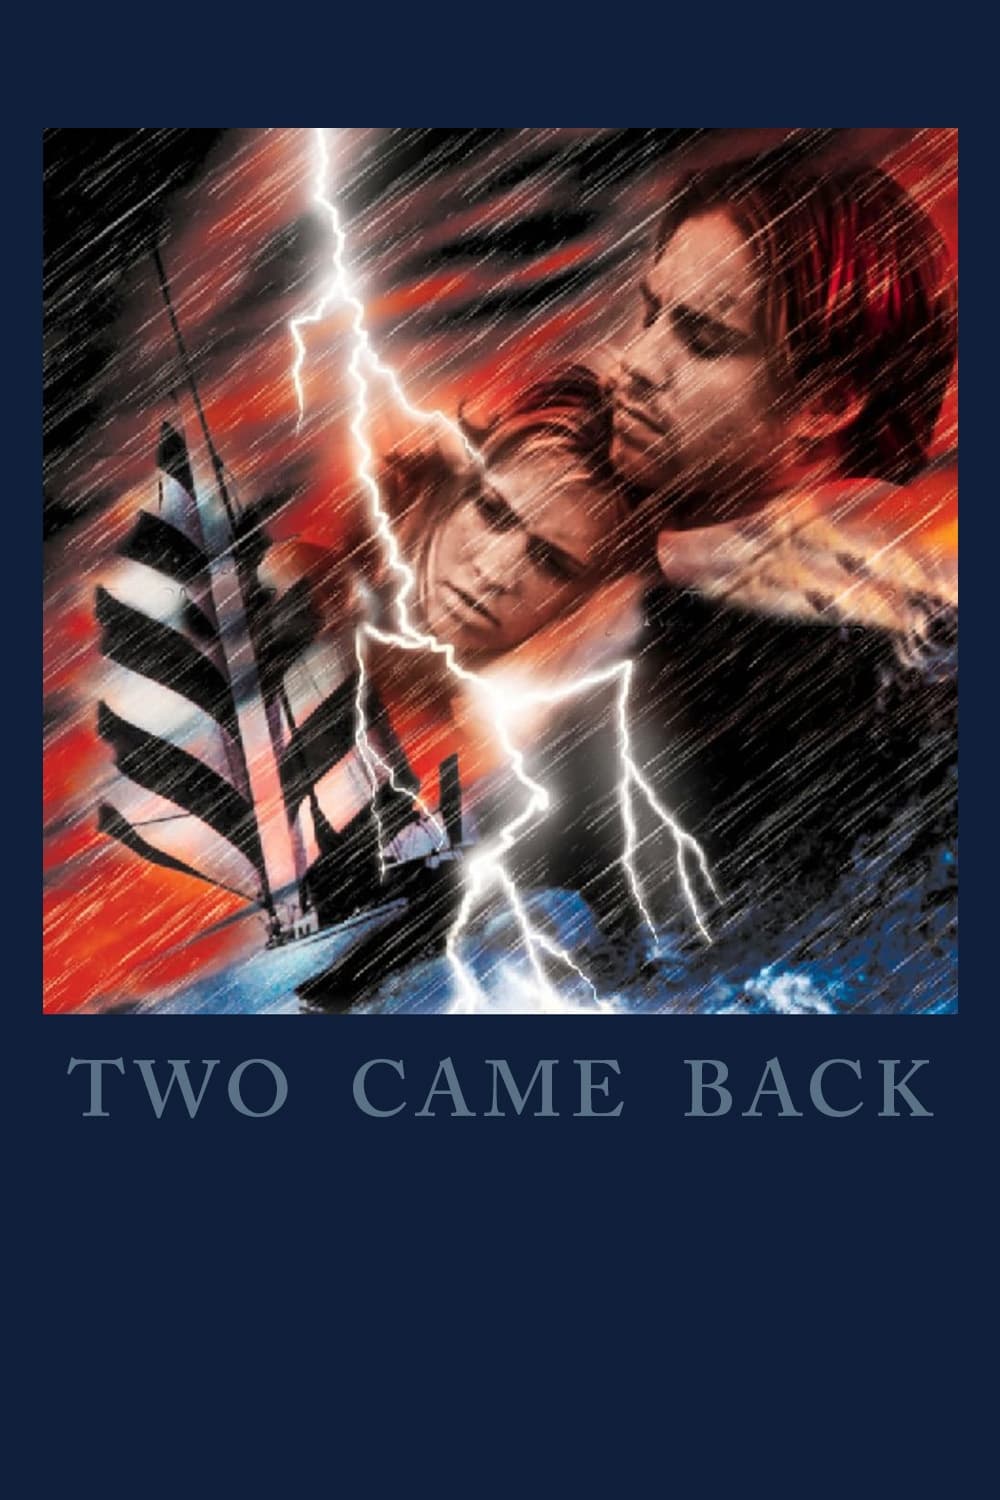 Two Came Back (1997)